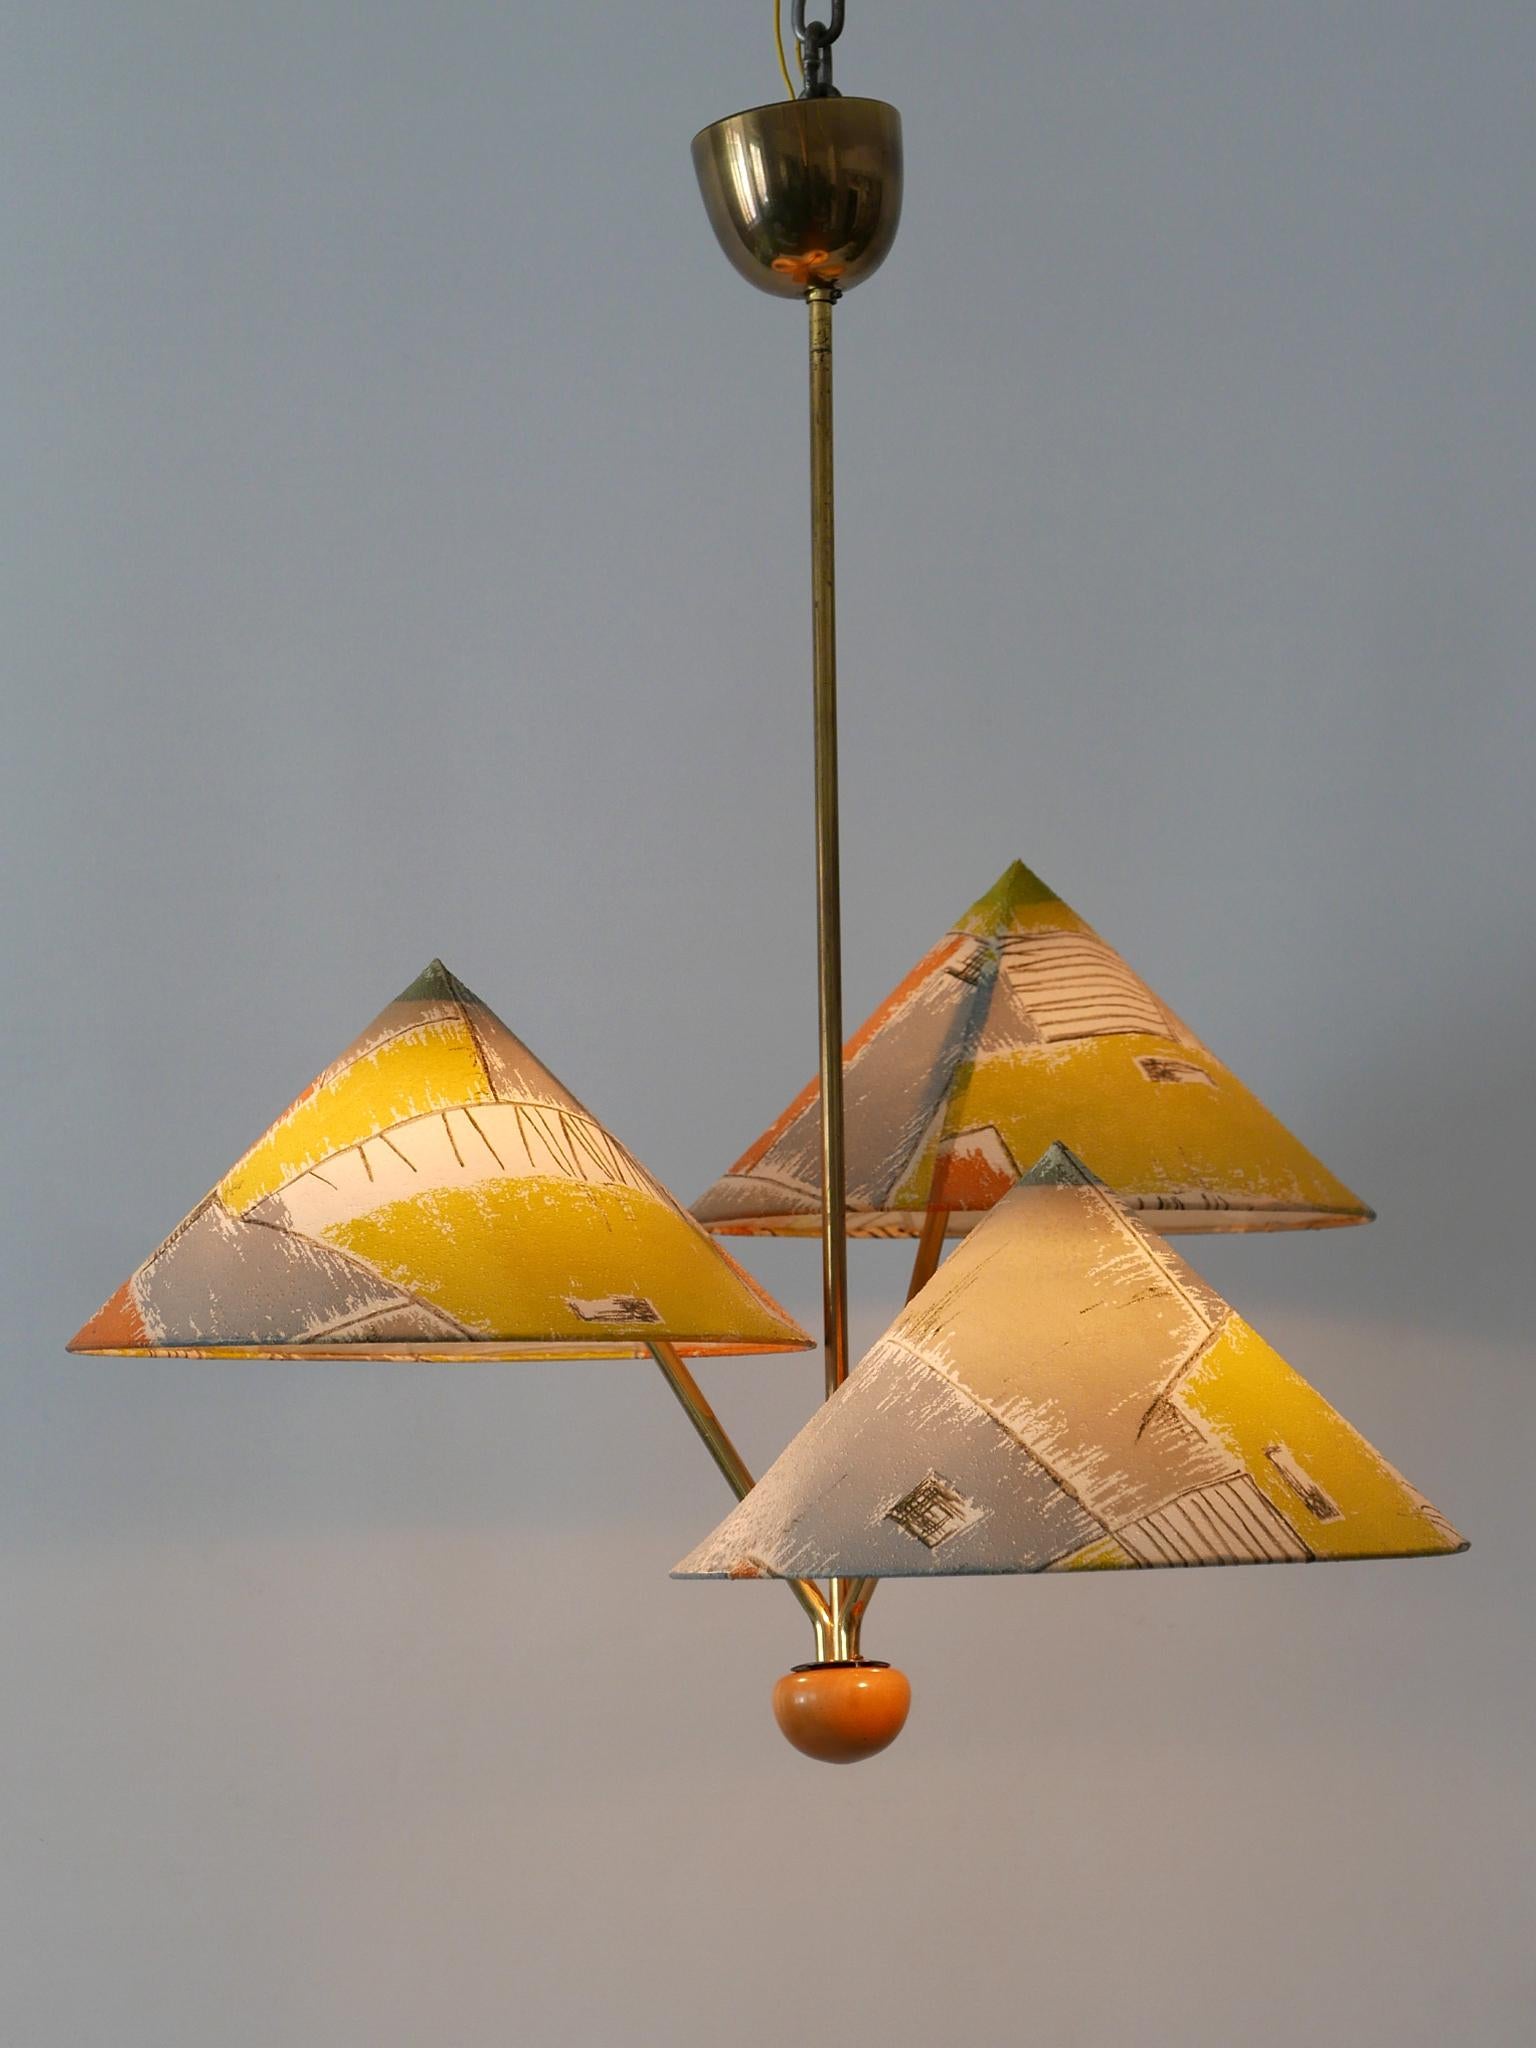 Rare and highly decorative Mid-Century Modern three-armed pendant lamp or chandelier with lamp shades 'Chinese Hut'. Designed and manufactured by Rupert Nikoll, Austria, 1950s.

Executed in brass and multi-colored plastic lamp shades, the pendant